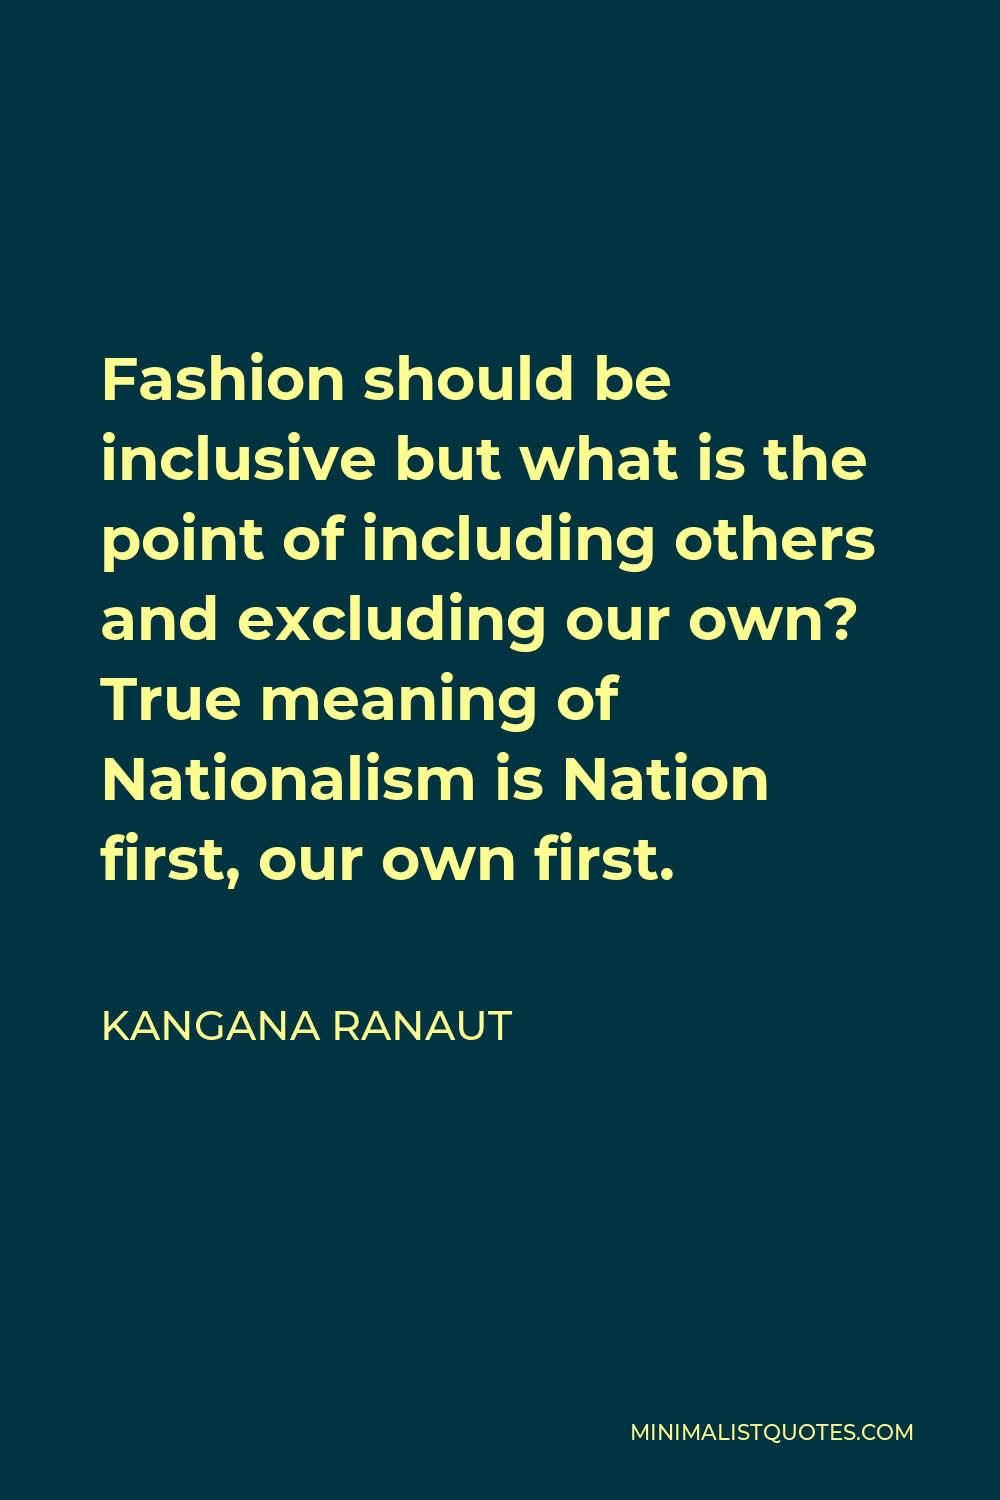 Kangana Ranaut Quote - Fashion should be inclusive but what is the point of including others and excluding our own? True meaning of Nationalism is Nation first, our own first.